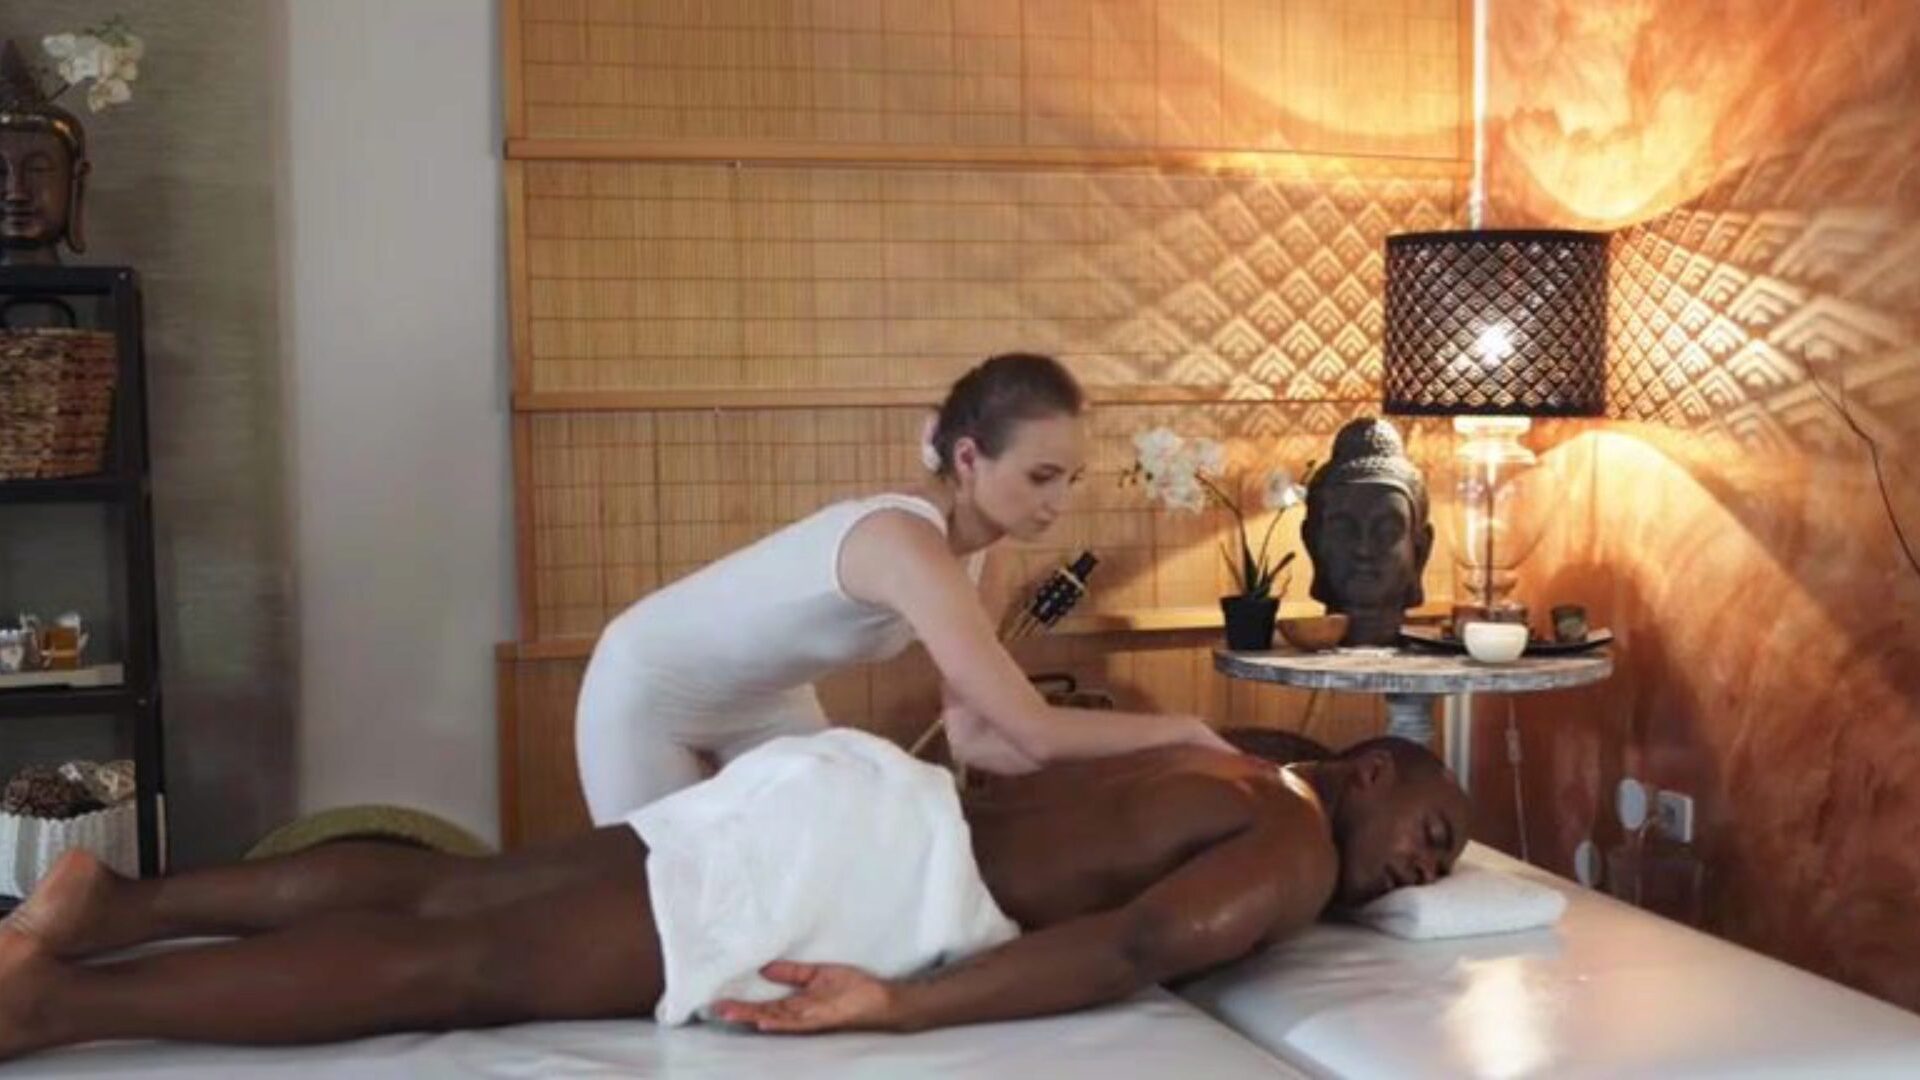 Soaked Caucasian Love Tunnel for Ripped Afro Bloke Giving an Erotic Body Massage is an manga in and of itself, but the way this chick makes that whole big d vanish is the real magic trick!